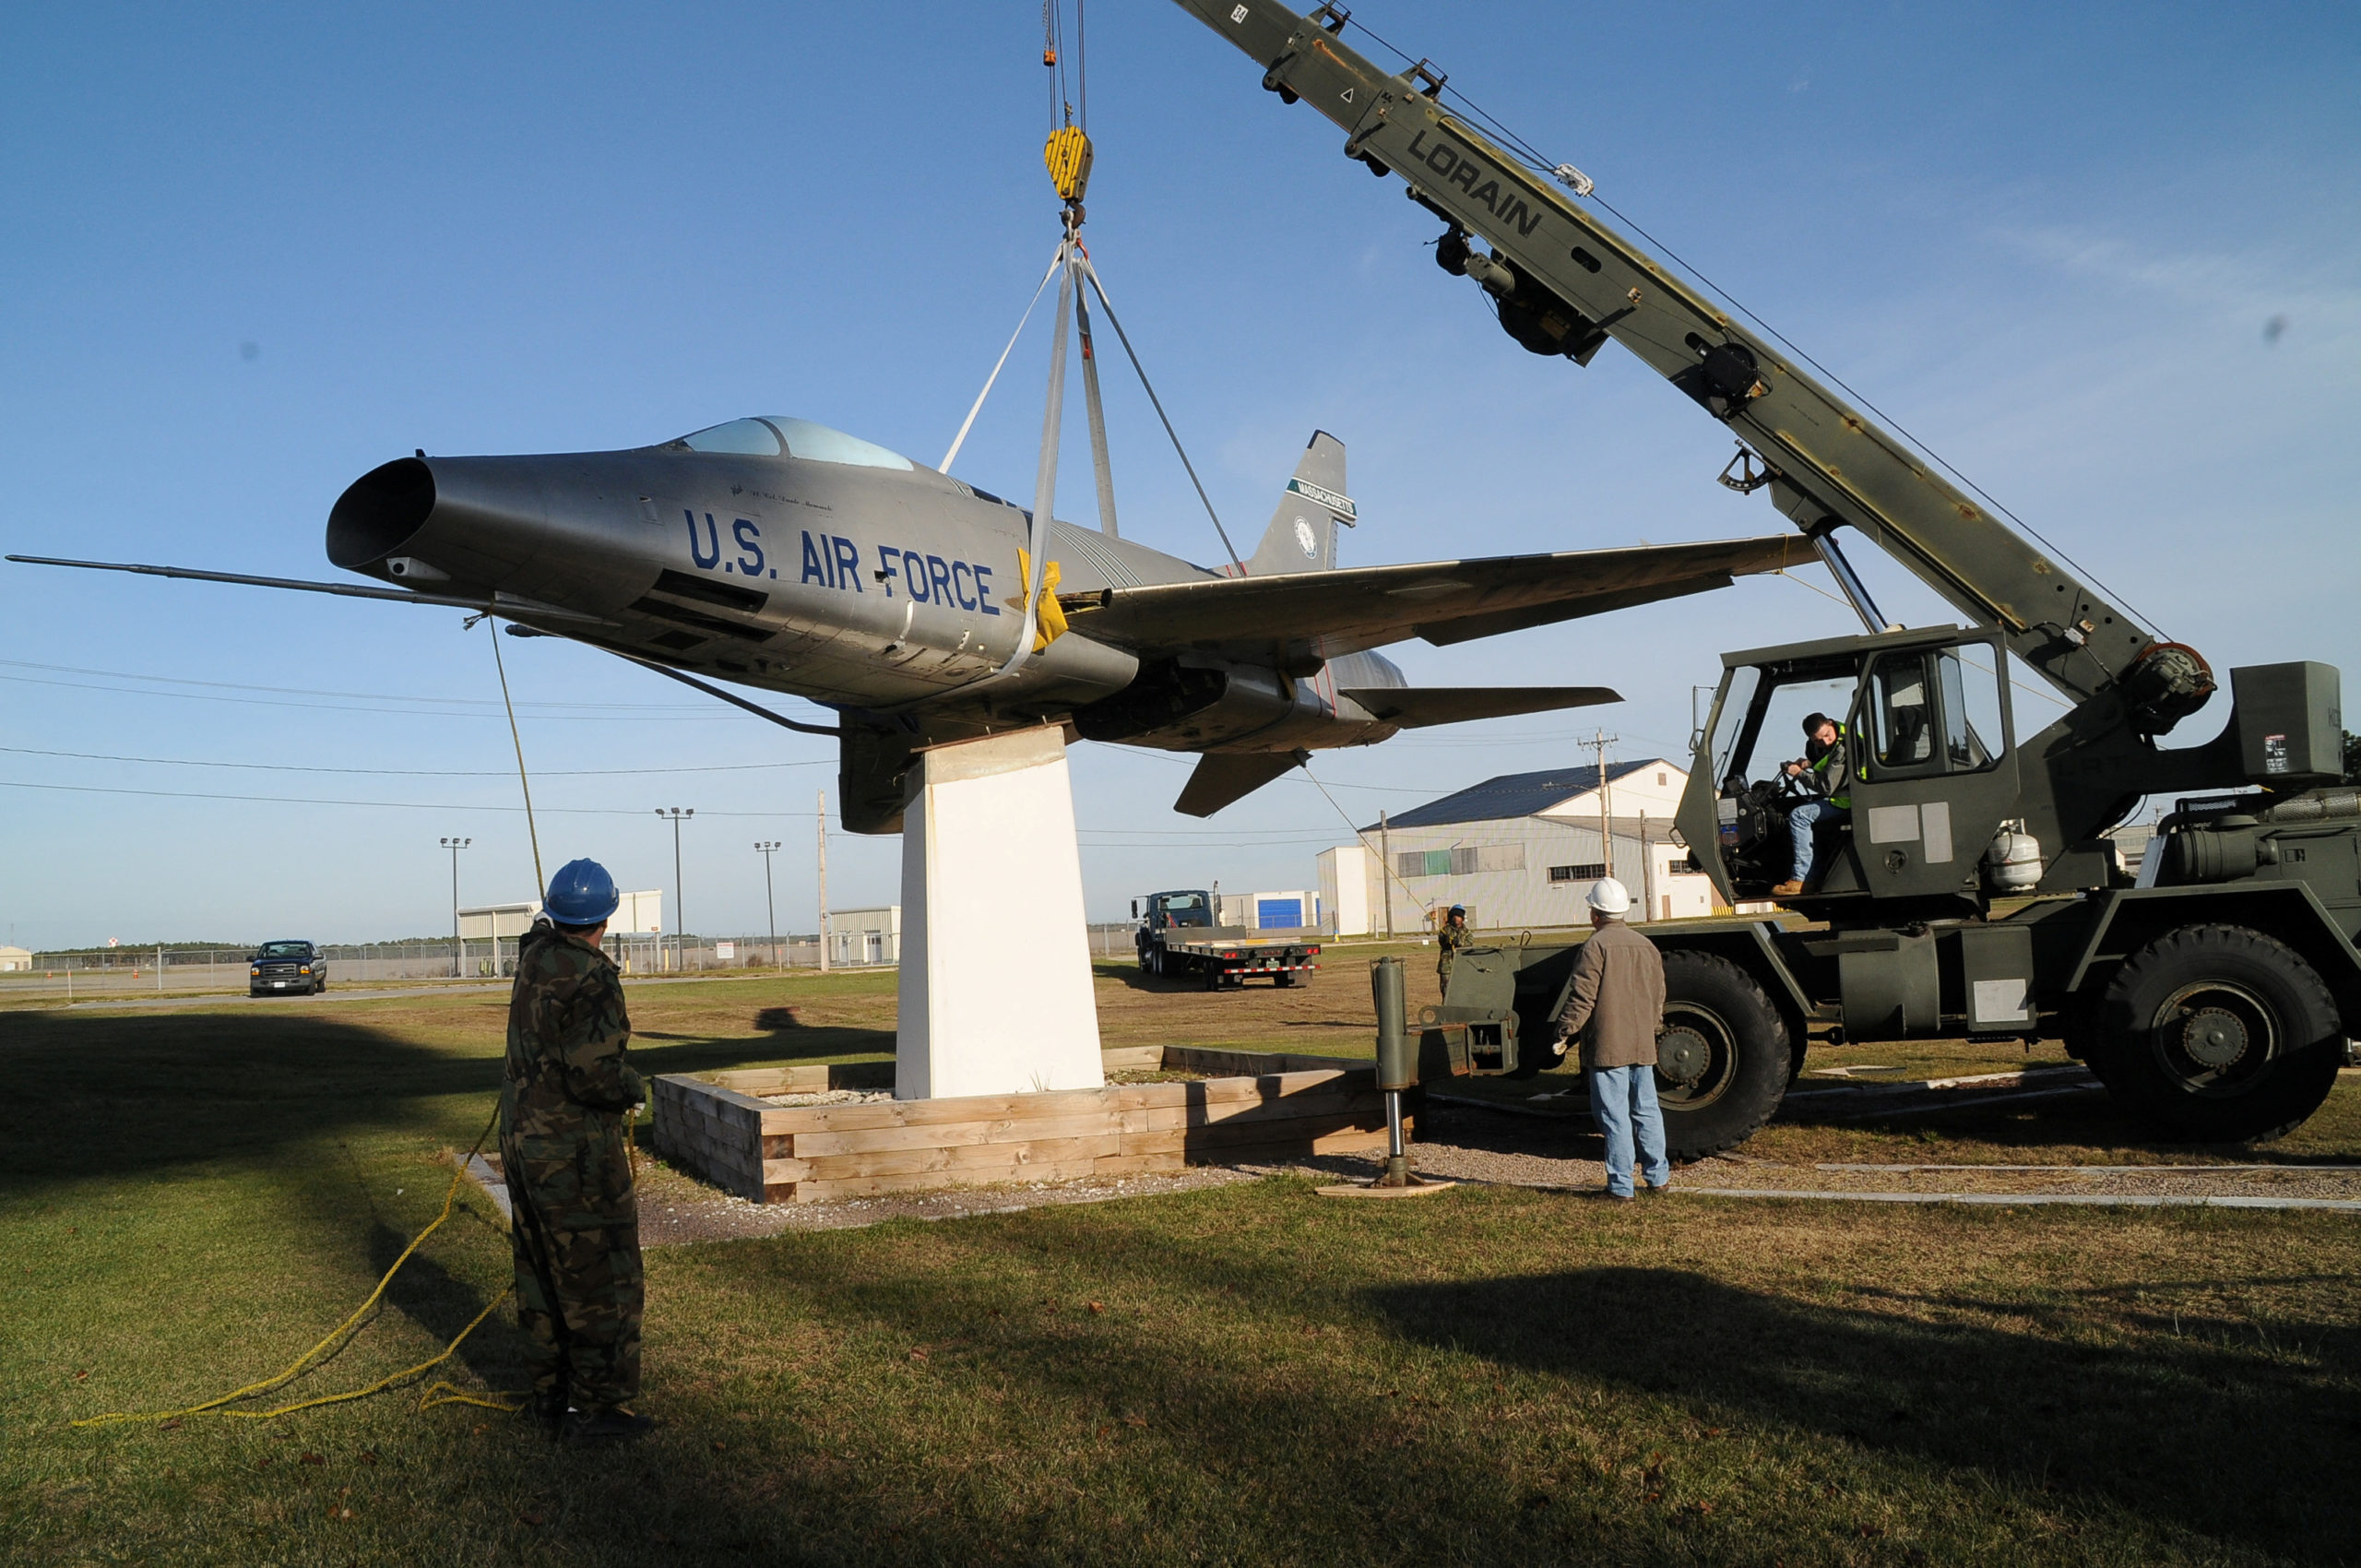 An exhibit specialist in aircraft restoration assists the 102nd Intelligence Wing Civil Engineers with the removal of an F-100 static aircraft at Otis Air National Guard Base in Cape Cod, Massachusetts, U.S. November 30, 2010. Master Sgt. Sandra Niedzwiecki/U.S. Air Force/Handout via REUTERS THIS IMAGE HAS BEEN SUPPLIED BY A THIRD PARTY.